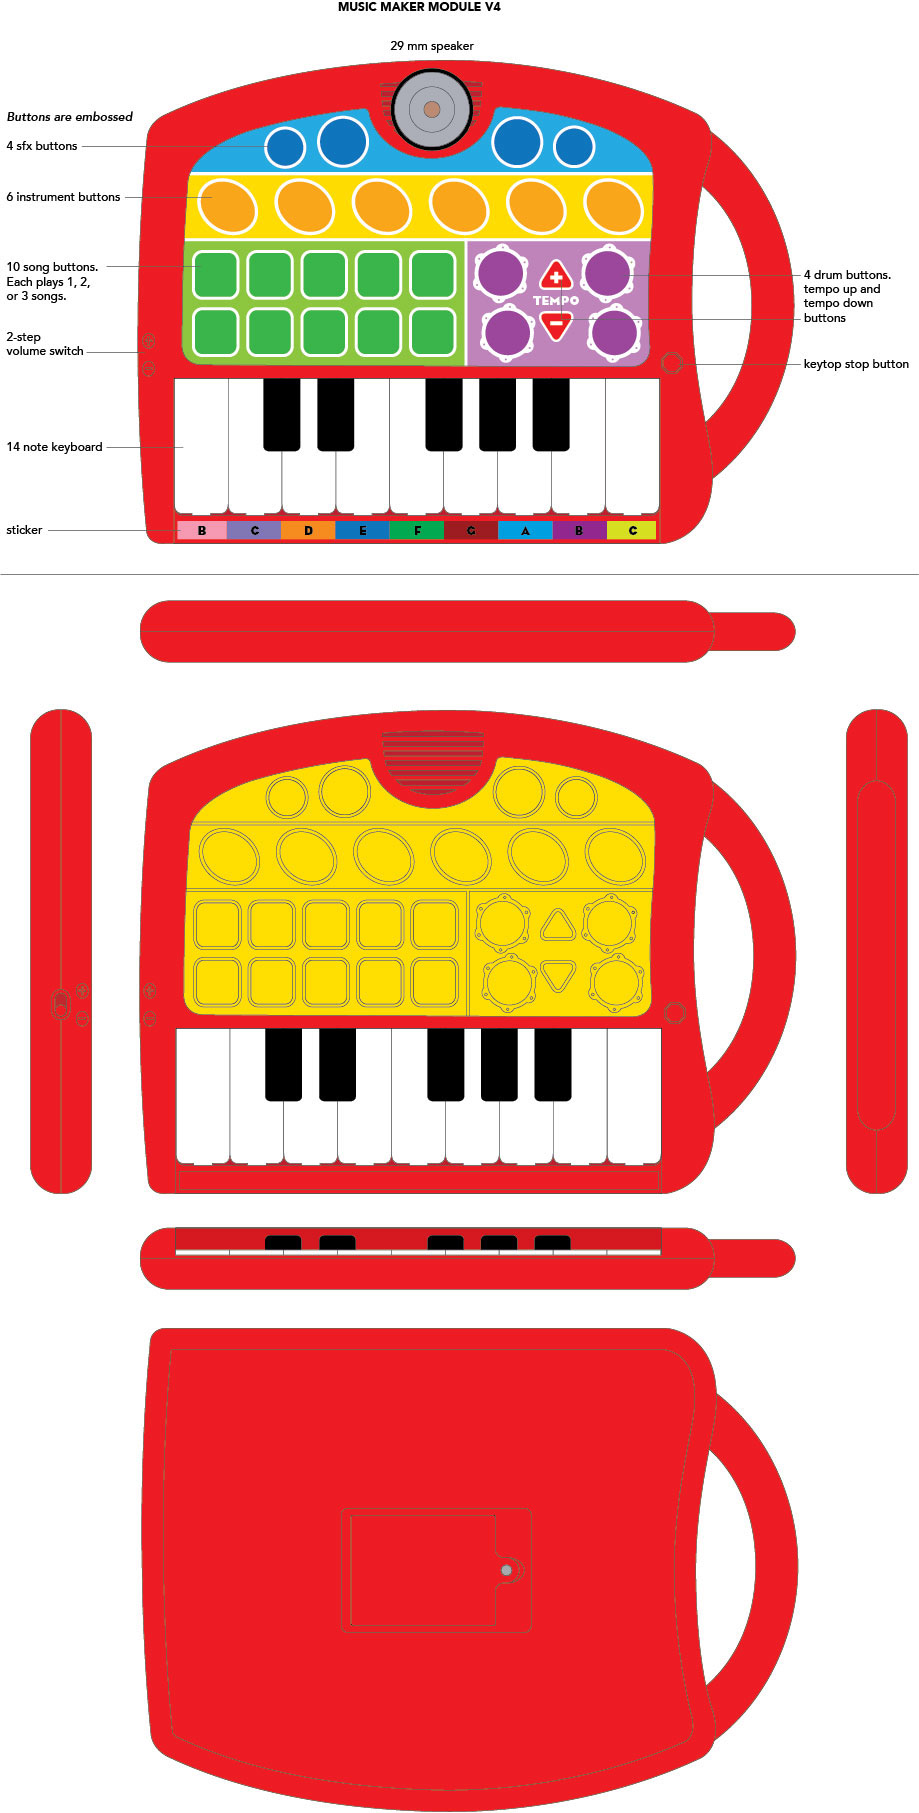 toy keyboard music maker Electronic Instrument